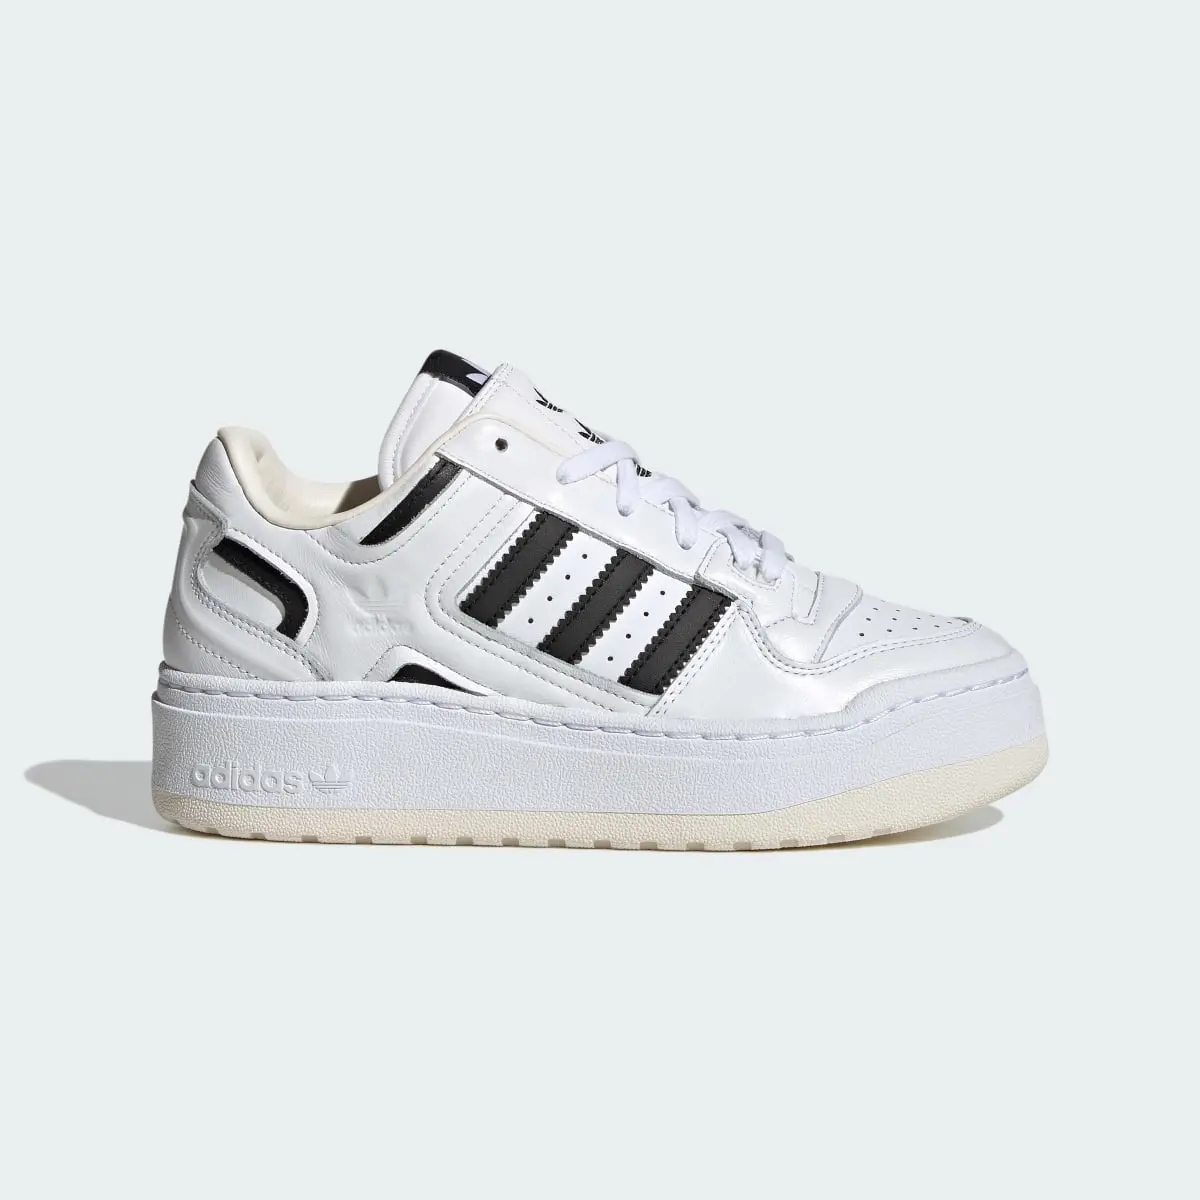 Adidas Chaussure Forum XLG. 2